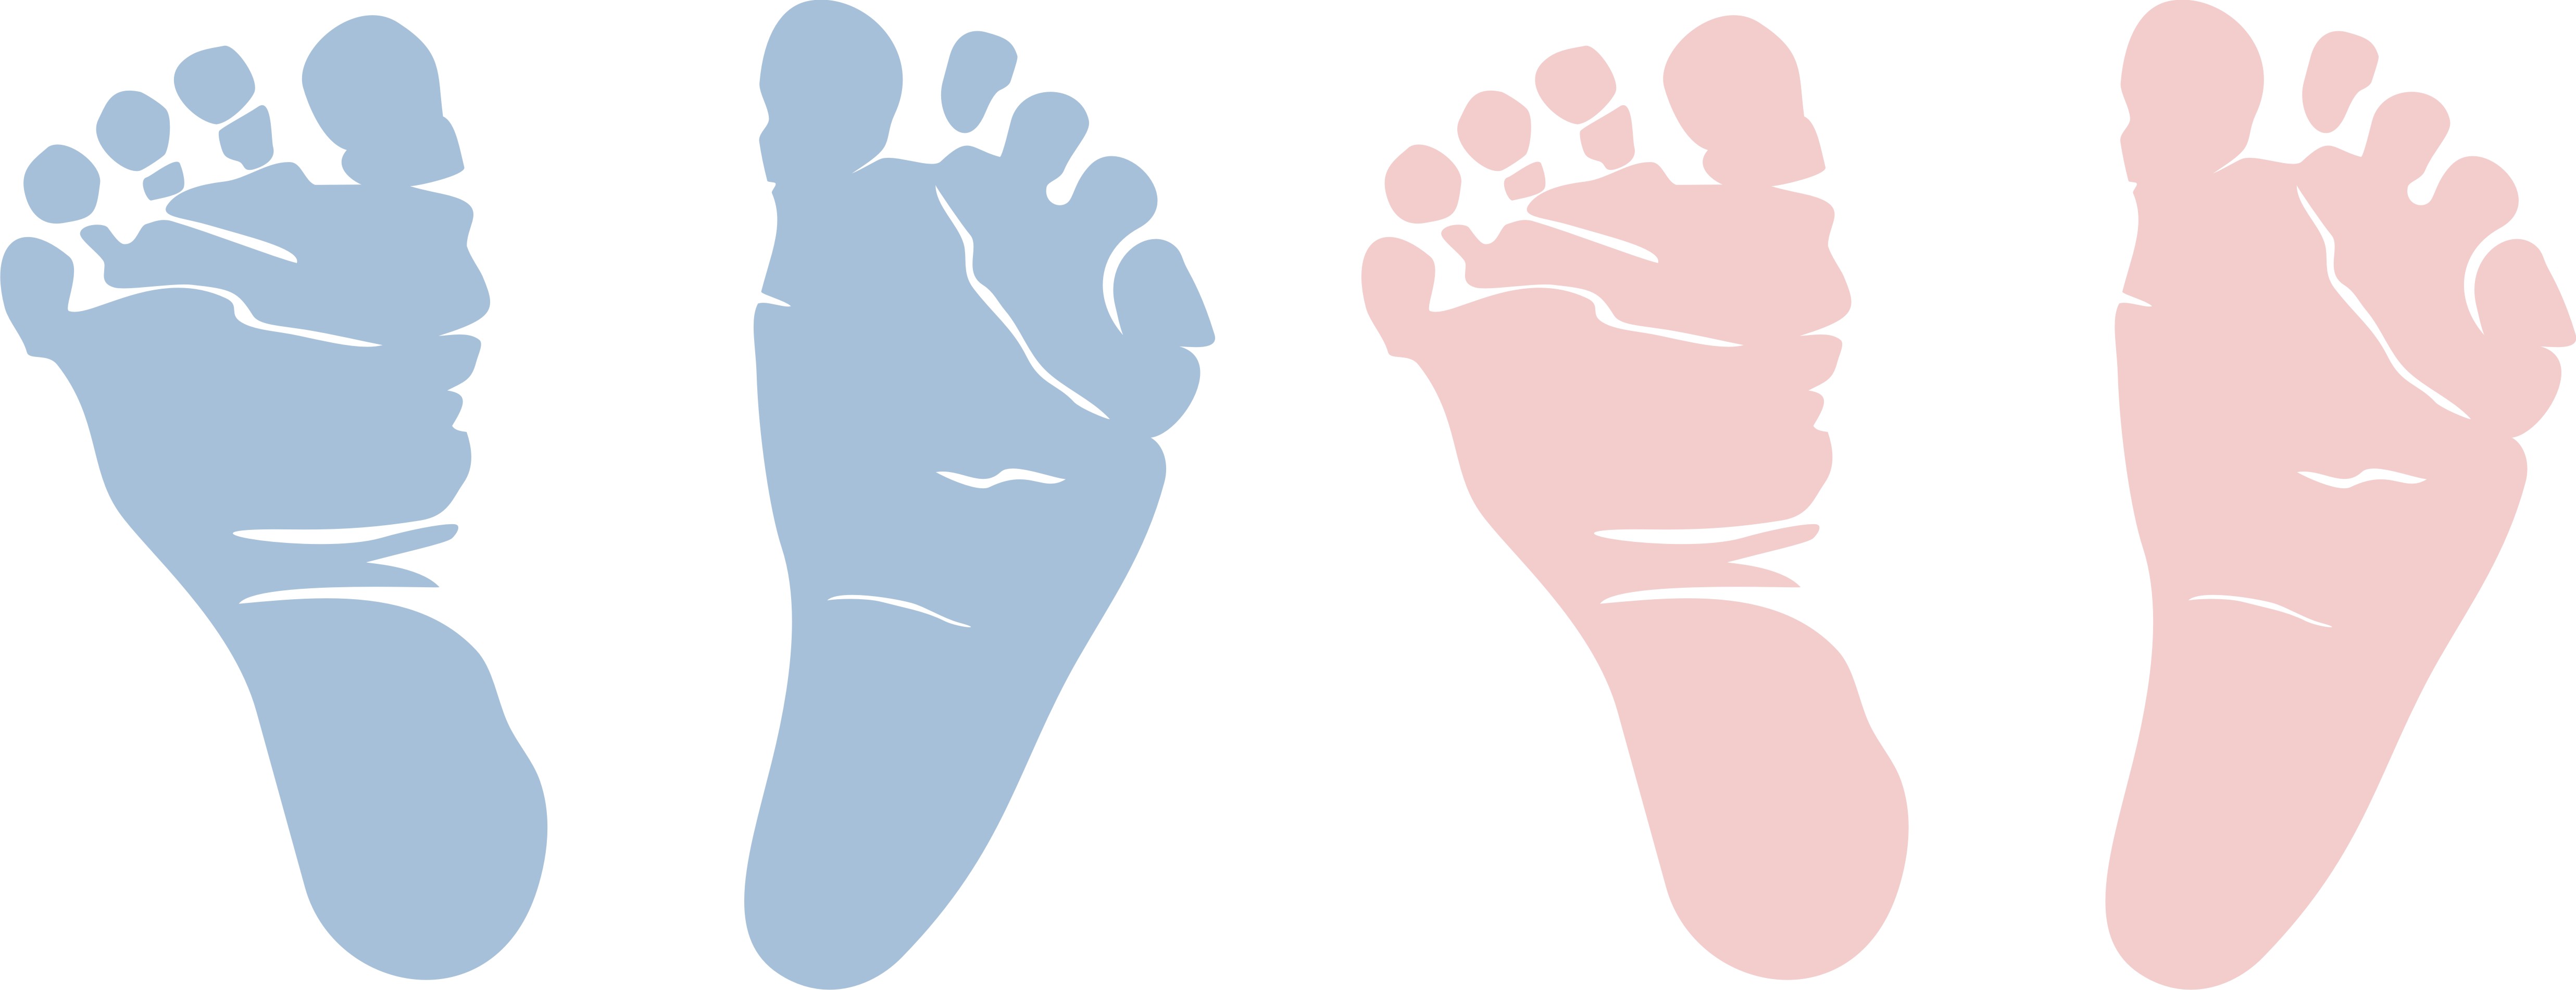 clipart of baby feet - photo #31